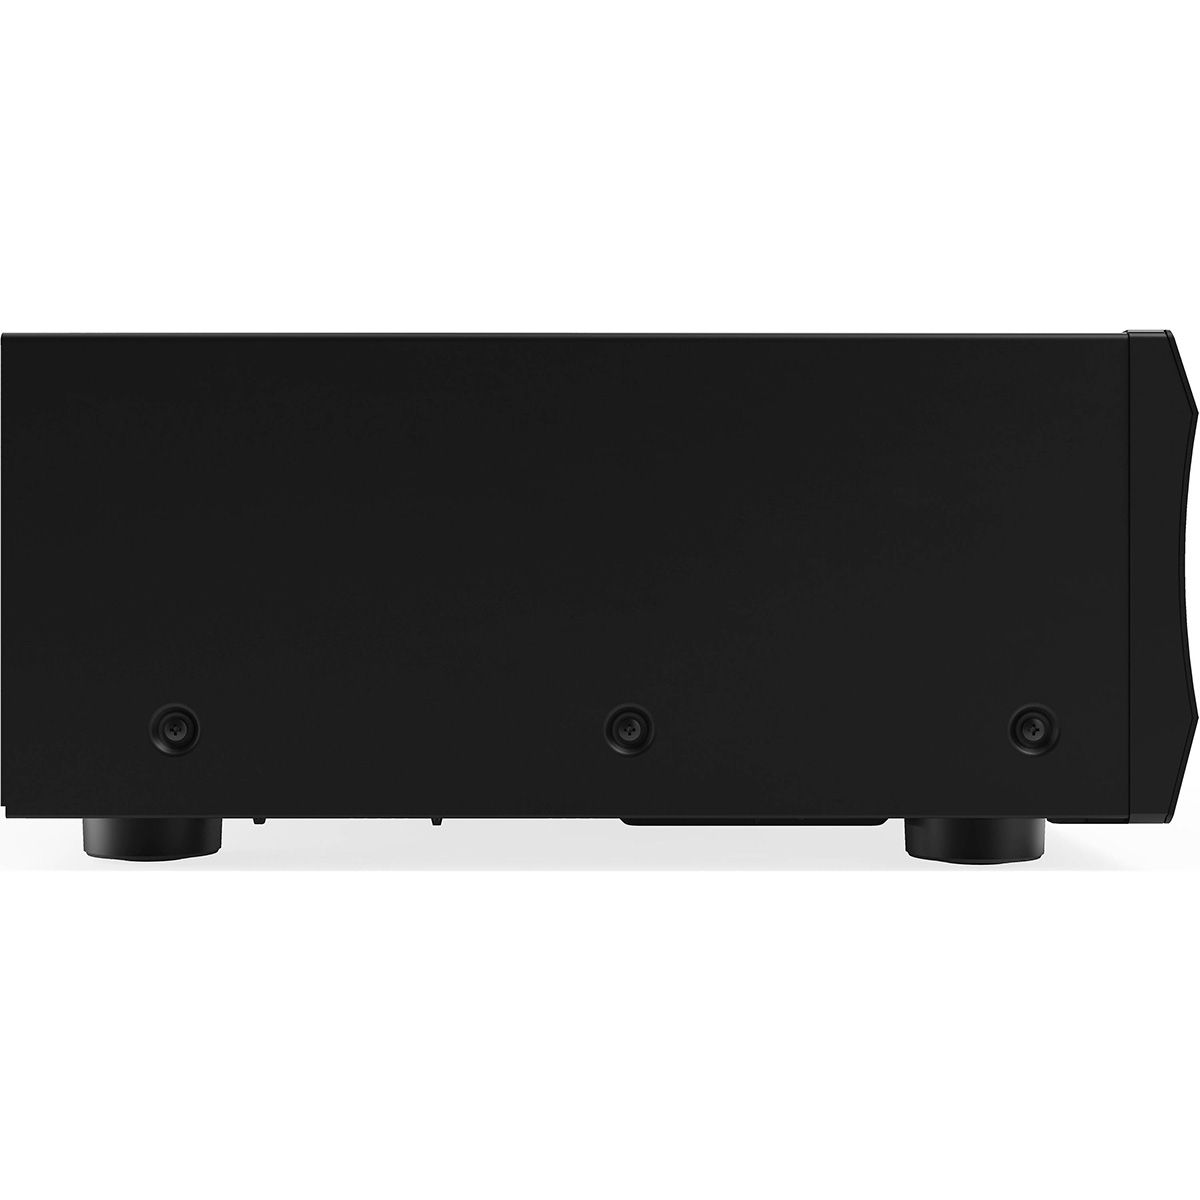 Integra 8.4 11.4 Channel Receiver Left Side View